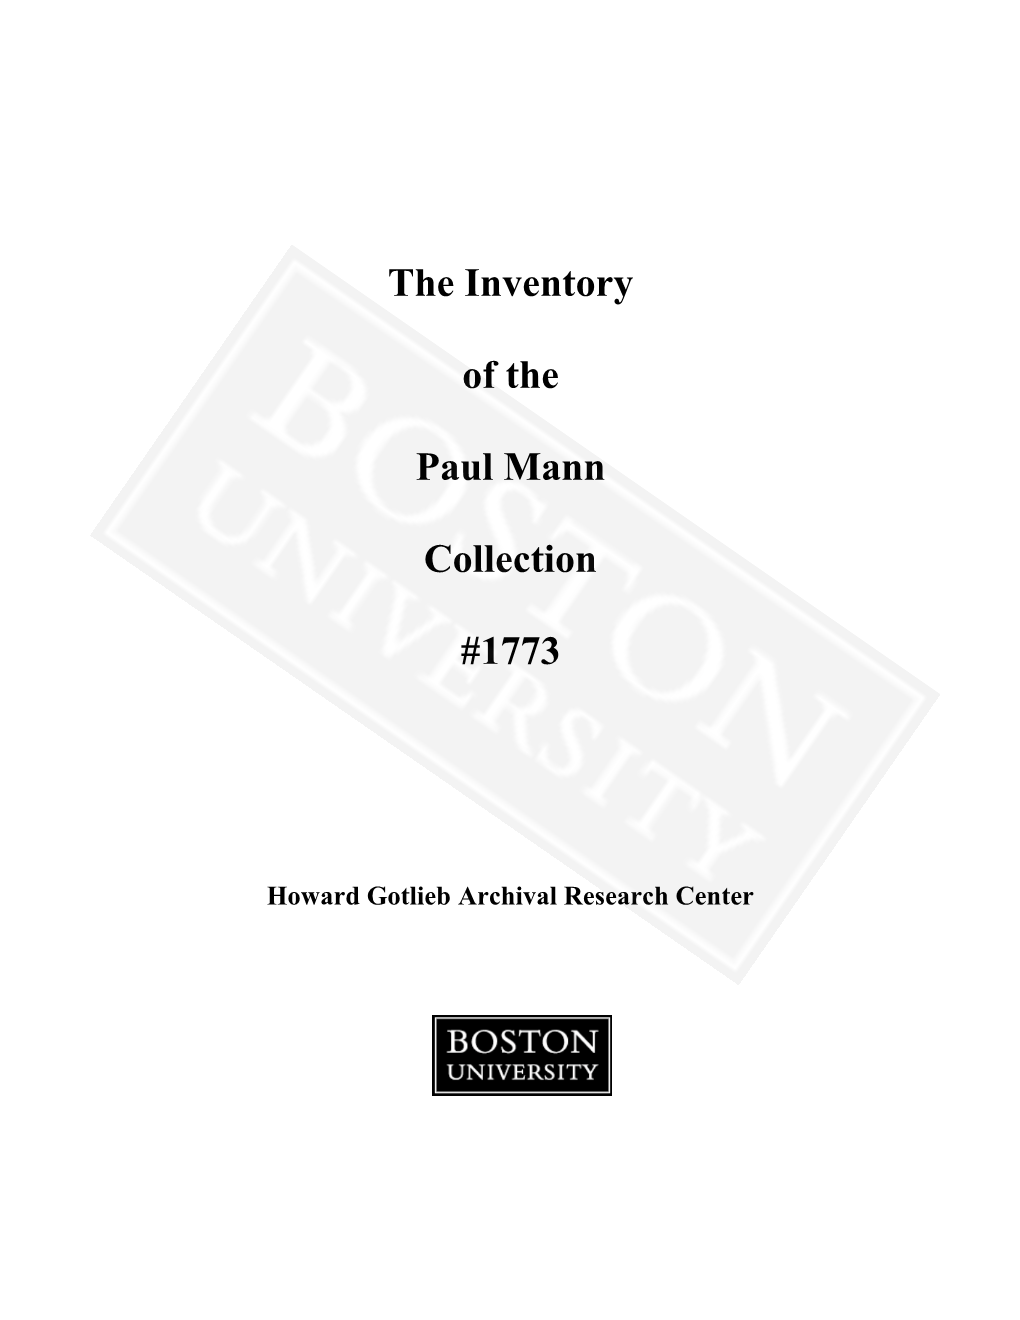 The Inventory of the Paul Mann Collection #1773